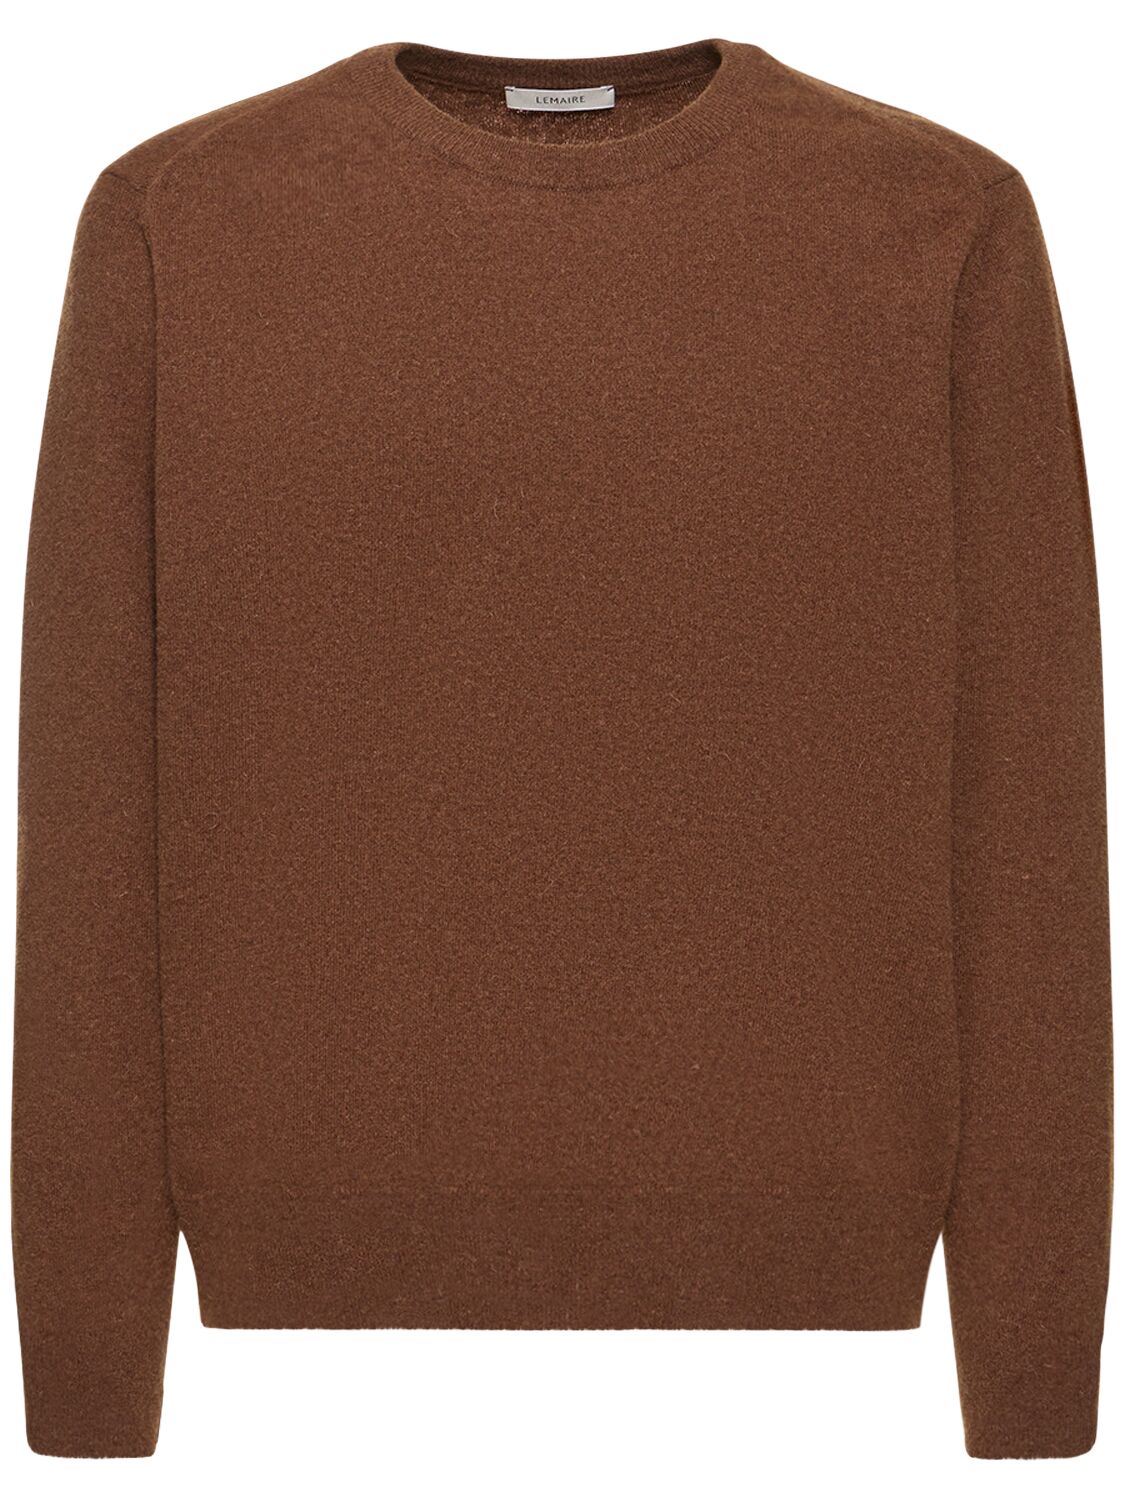 Image of Wide Neck Wool Blend Knit Sweater